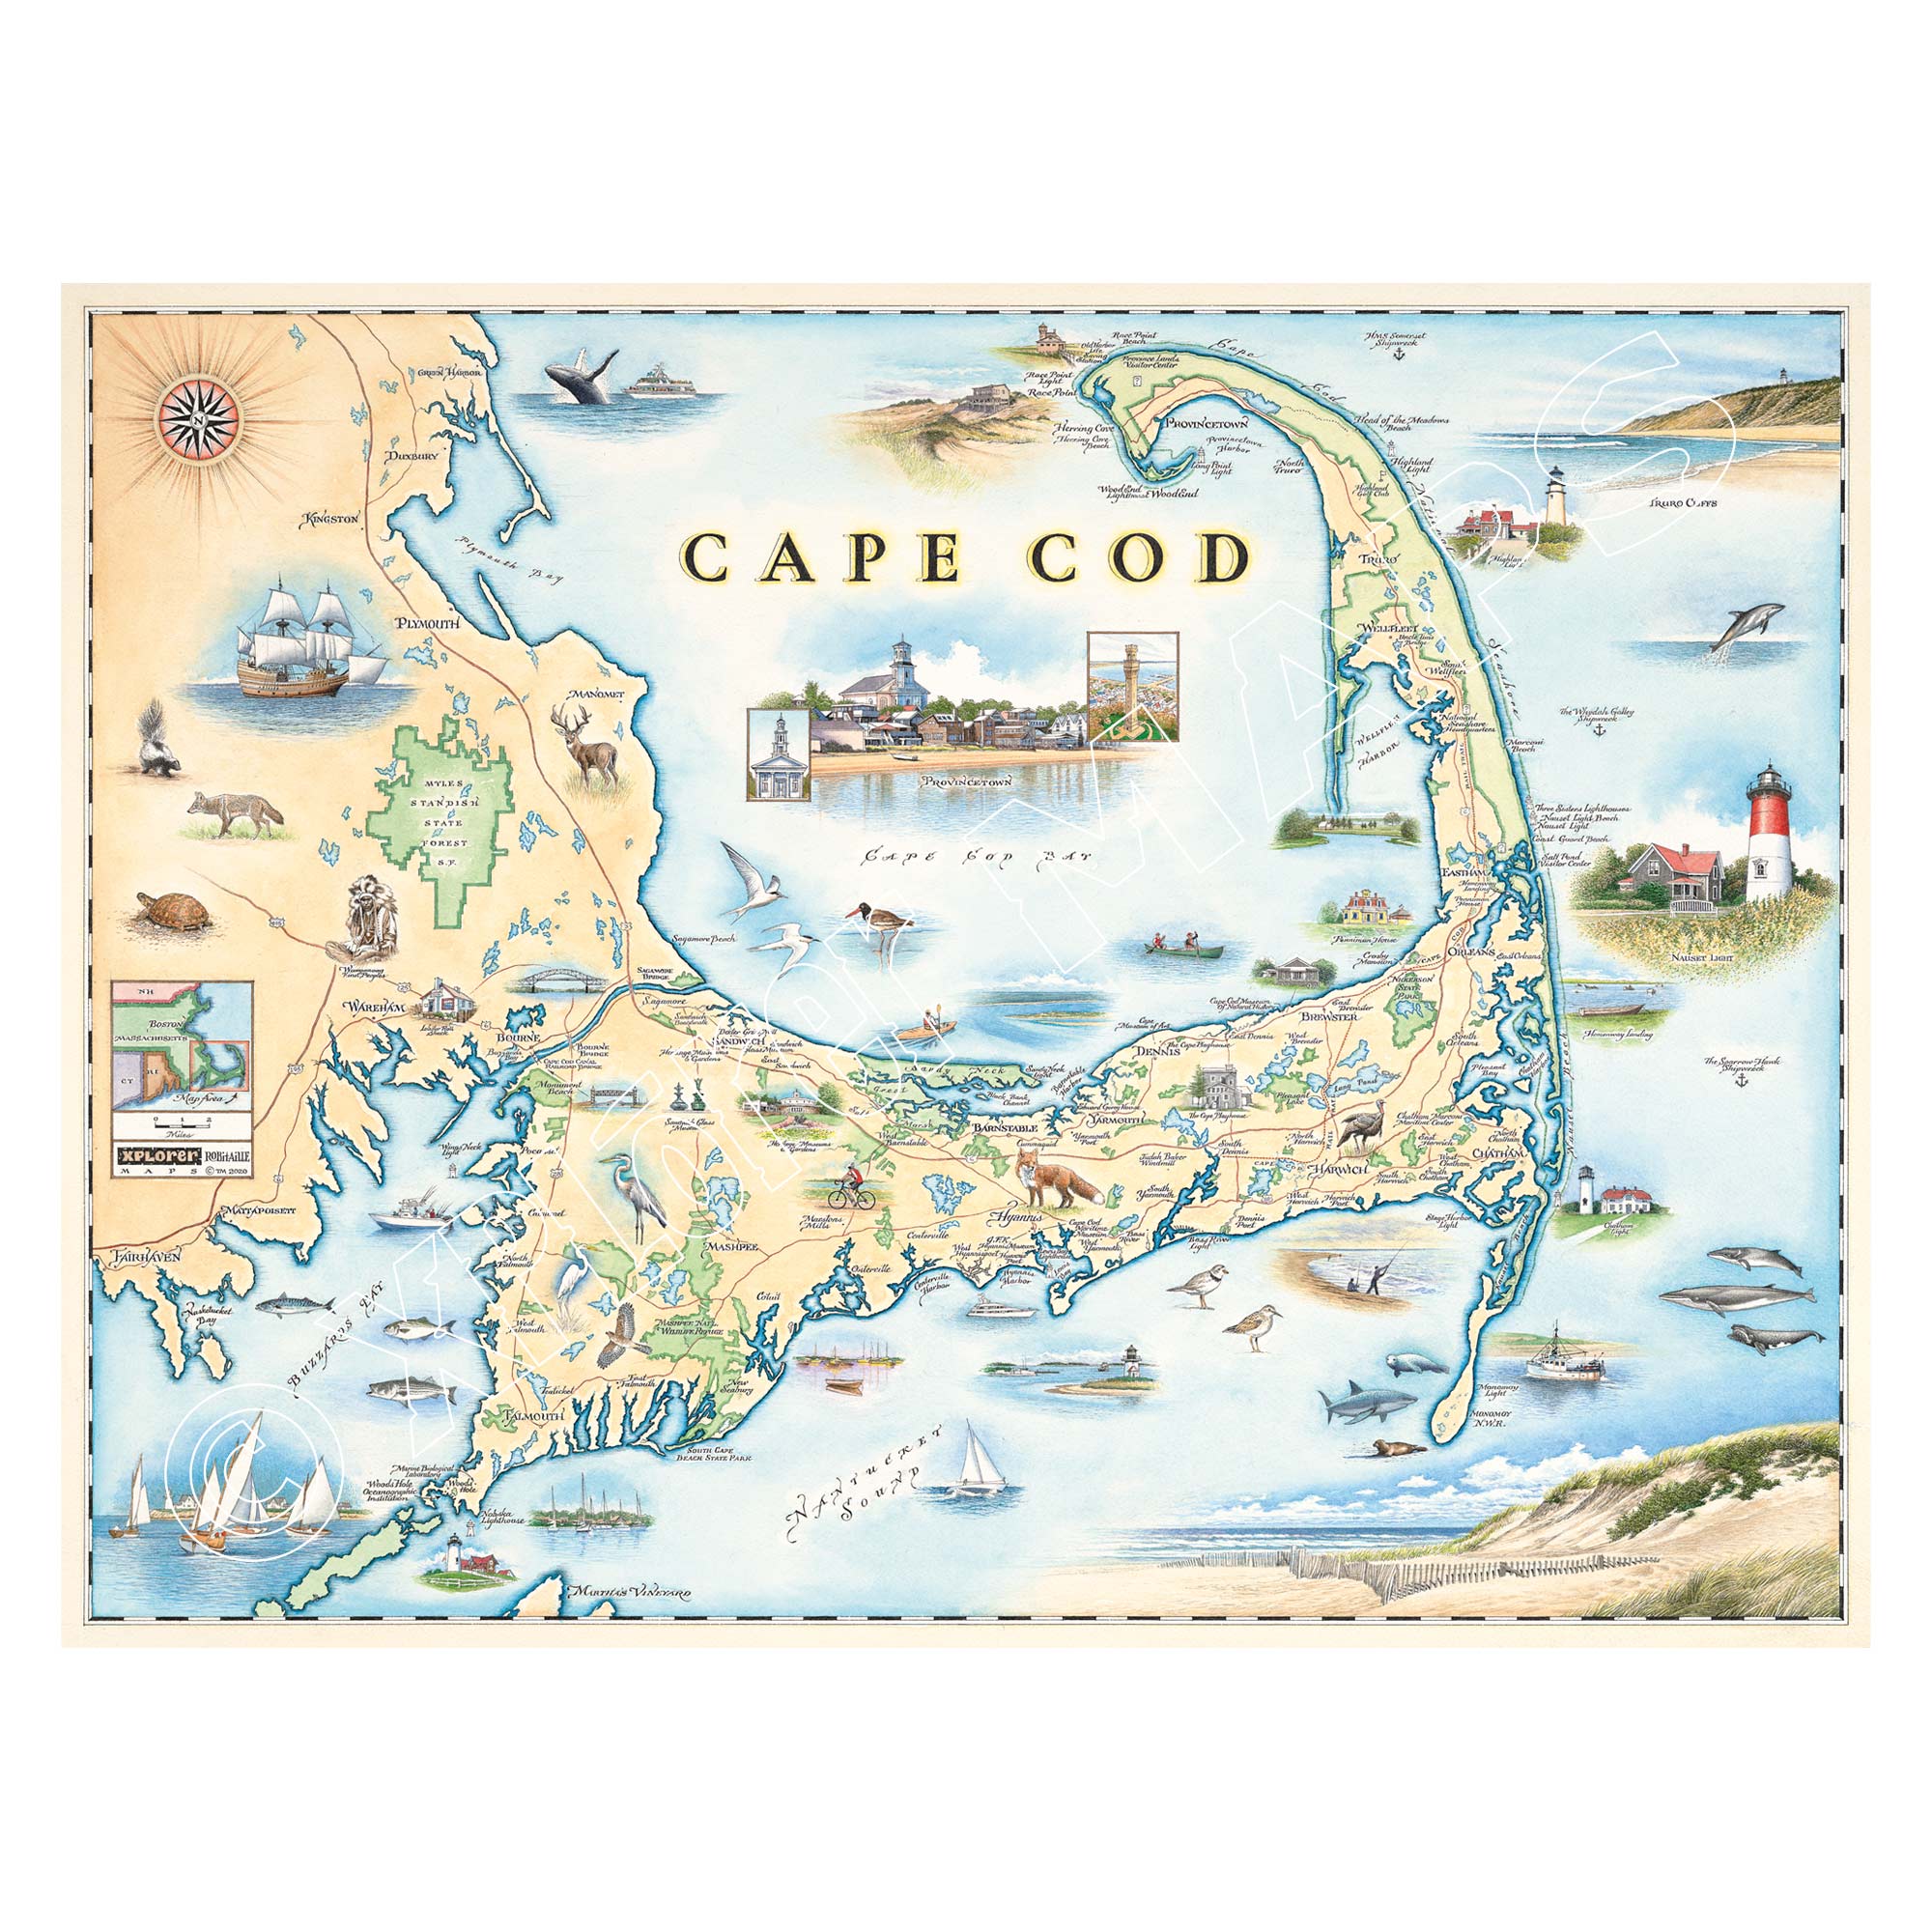 Massachusetts' Cape Cod Peninsula Hand-Drawn Map in earth tones of blue and beige. The map features whale, fox, deer, and many bird species. Provincetown, Brewster, Chatham, Falmouth, and others. Measures 24x18.